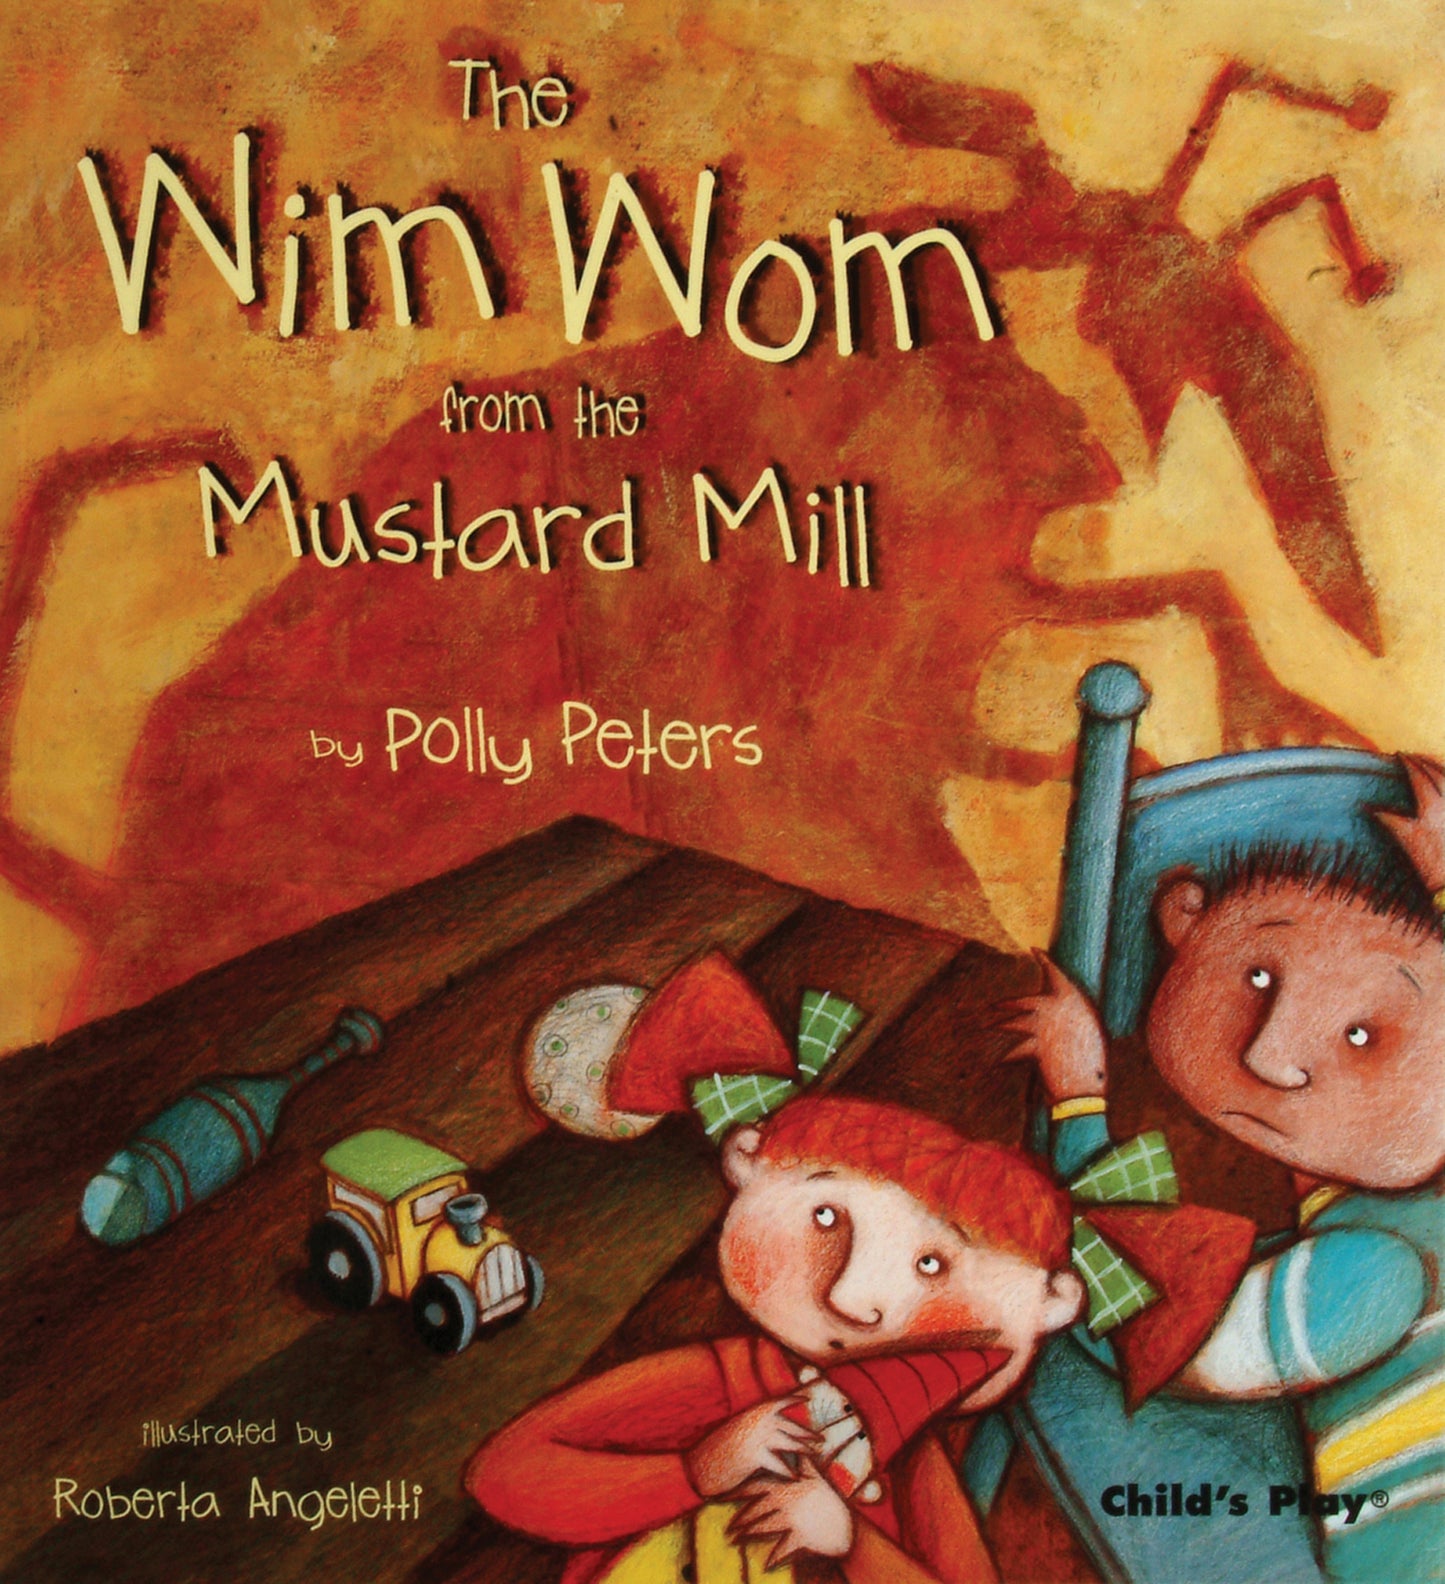 The Wim Wom from the Mustard Mill (Softcover Edition)